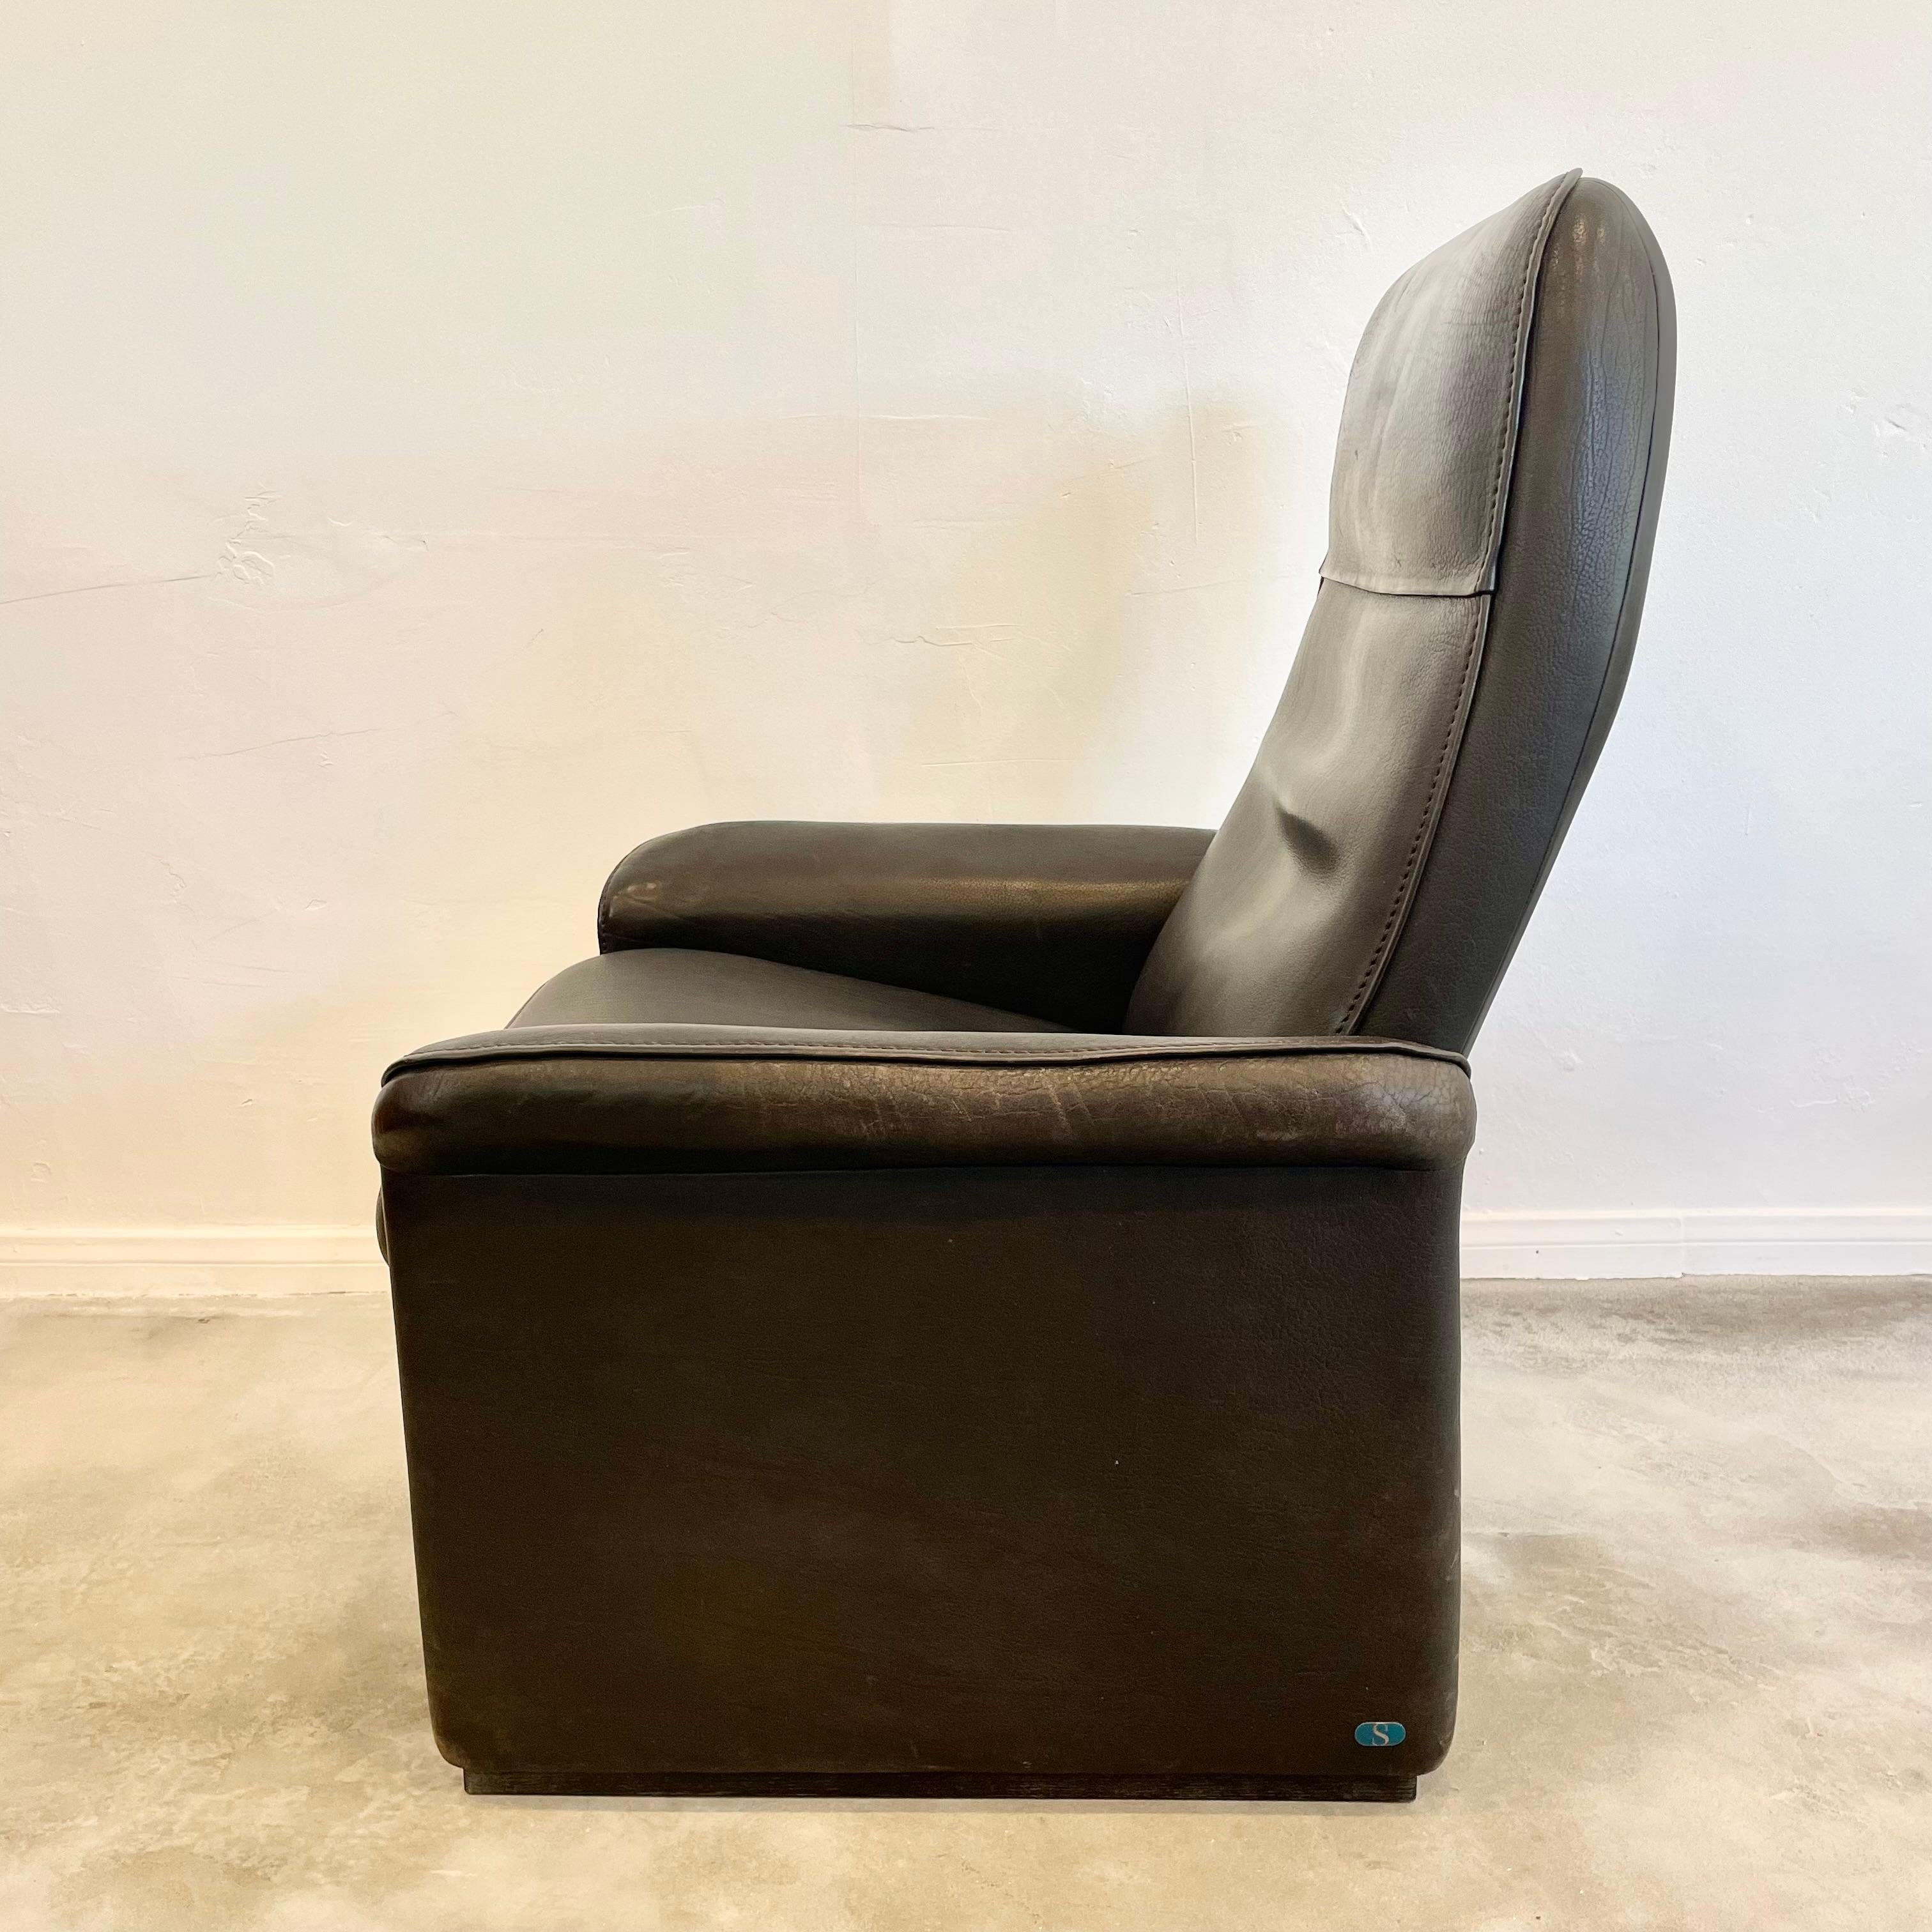 Pair of De Sede DS-50 Black Leather Recliner Chairs, 1970s Switzerland For Sale 1